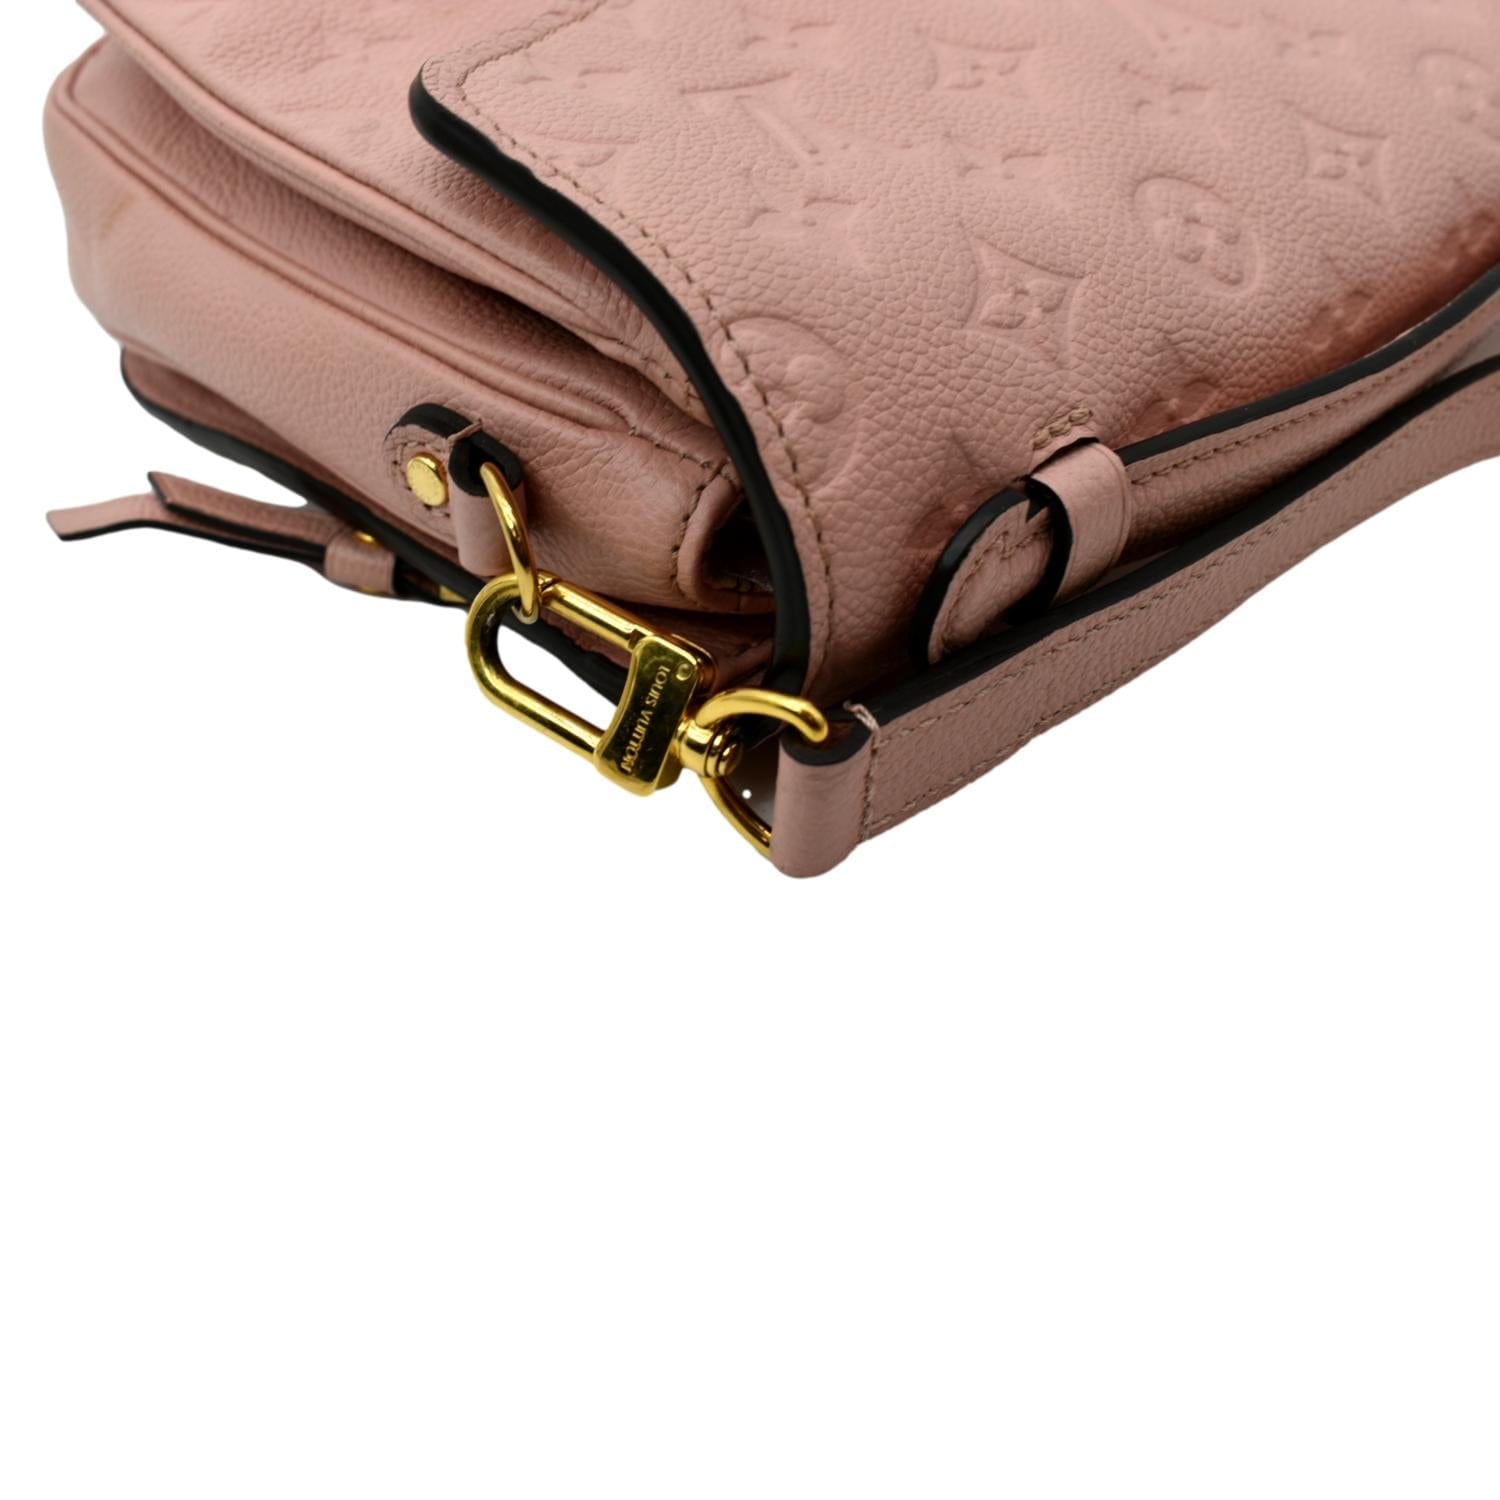 Help me decide! LV Pochette Metis or Diane (both in empreinte). For an  everyday bag. I love the Métis I've seen it in person but the Diane seems  to be a similar size and I love that it comes with the wide strap.  Thoughts? : r/handbags